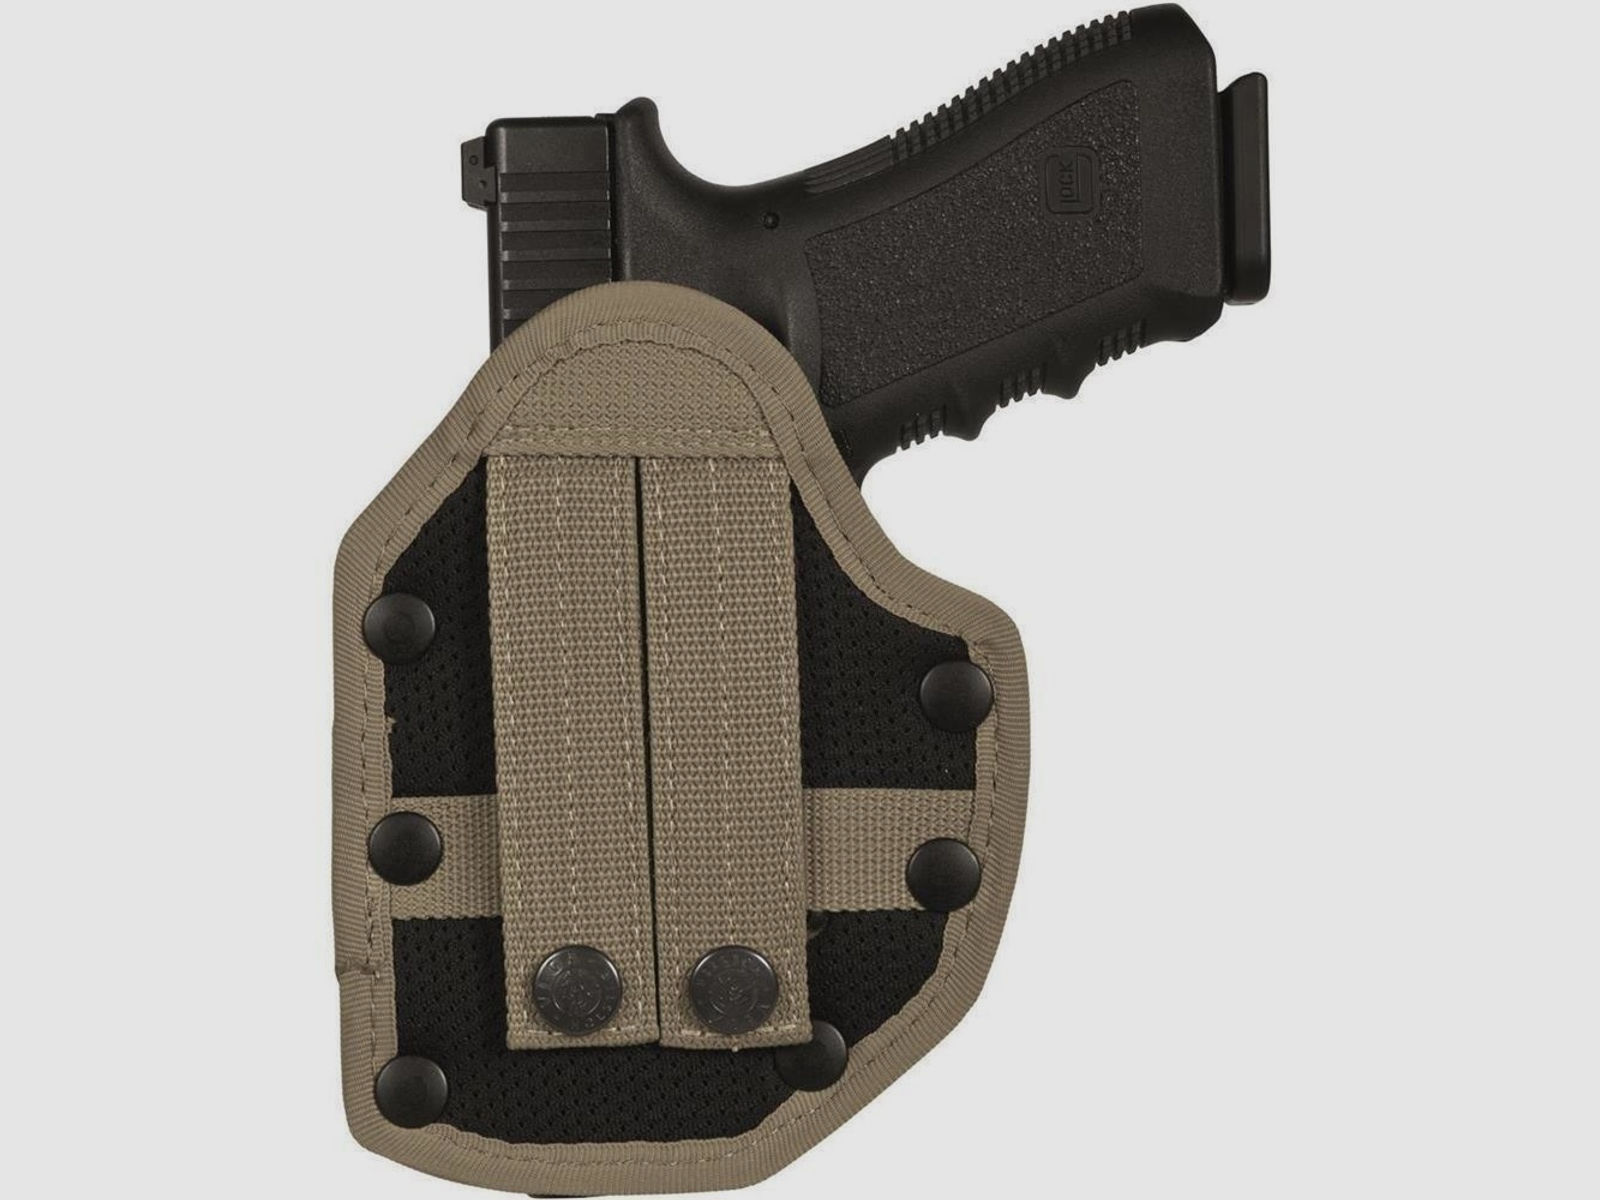 Thermogeformtes Polymerholster "KEEPER" Colt 1911 / Government,Para Ordnance P14/P16,Sig Sauer 1911,S&W 1911,Springfield 1911-Coyote TAN-Rechtshänder